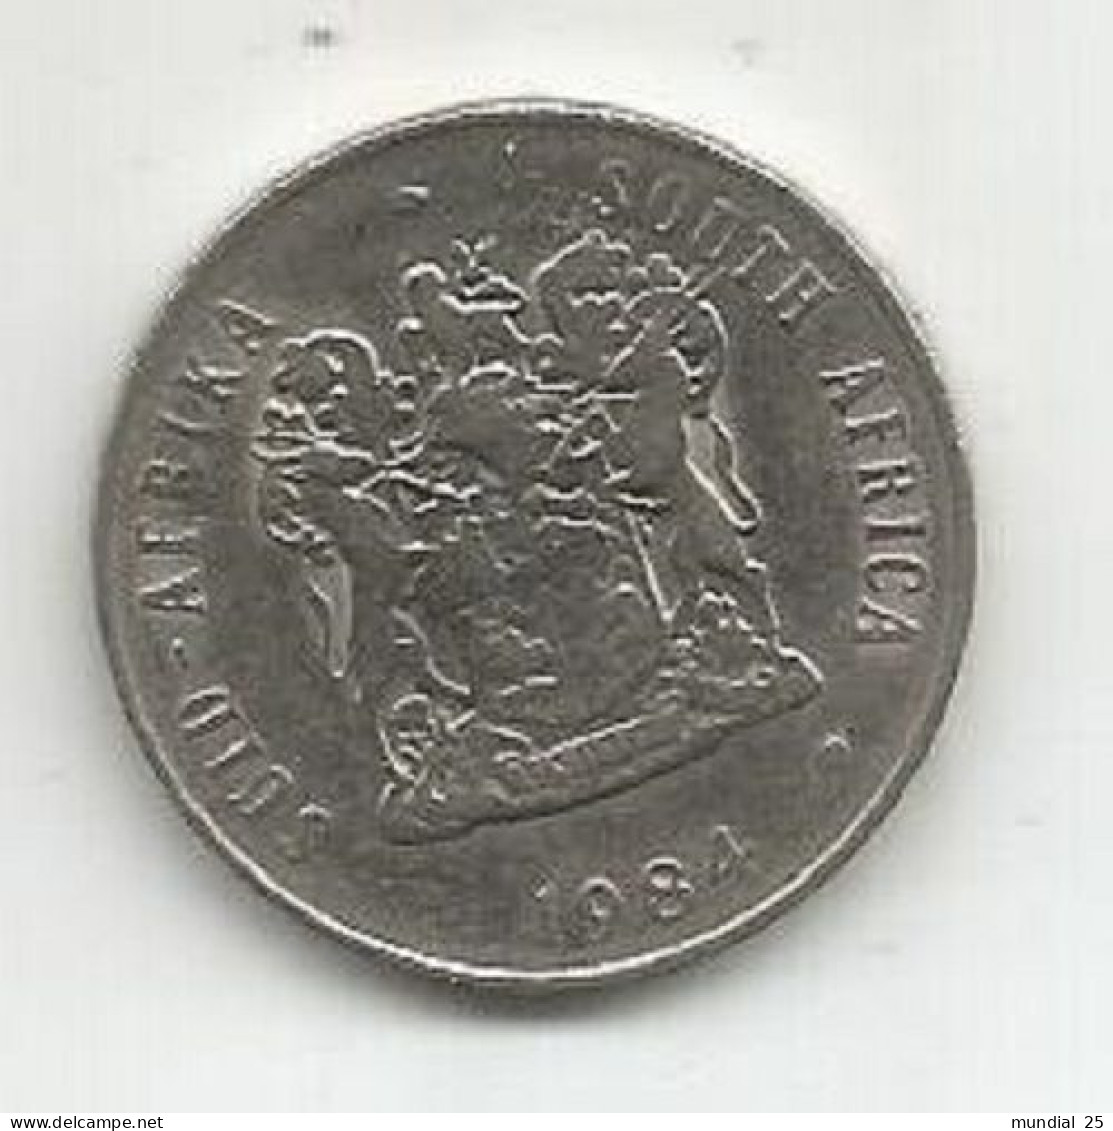 SOUTH AFRICA 20 CENTS 1984 - South Africa